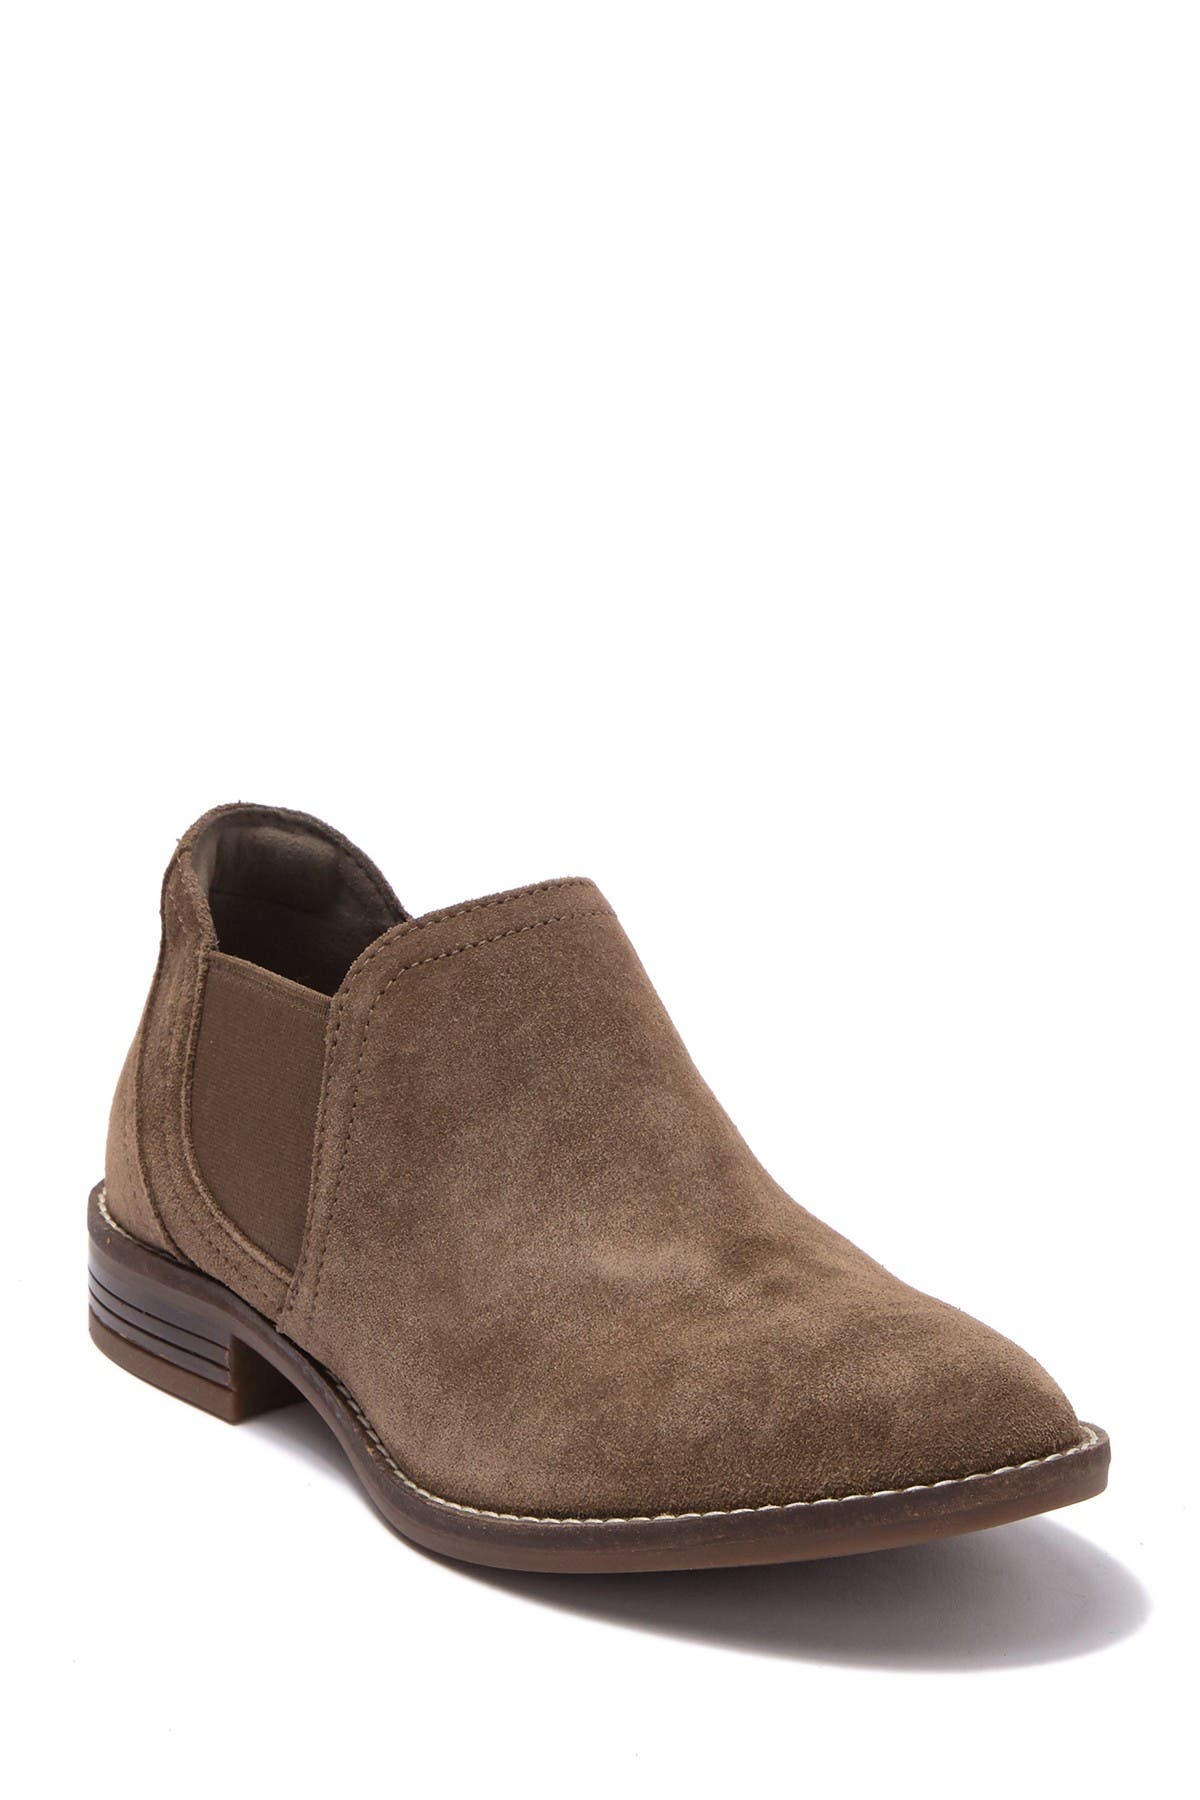 Clarks | Camzin Suede Ankle Bootie 